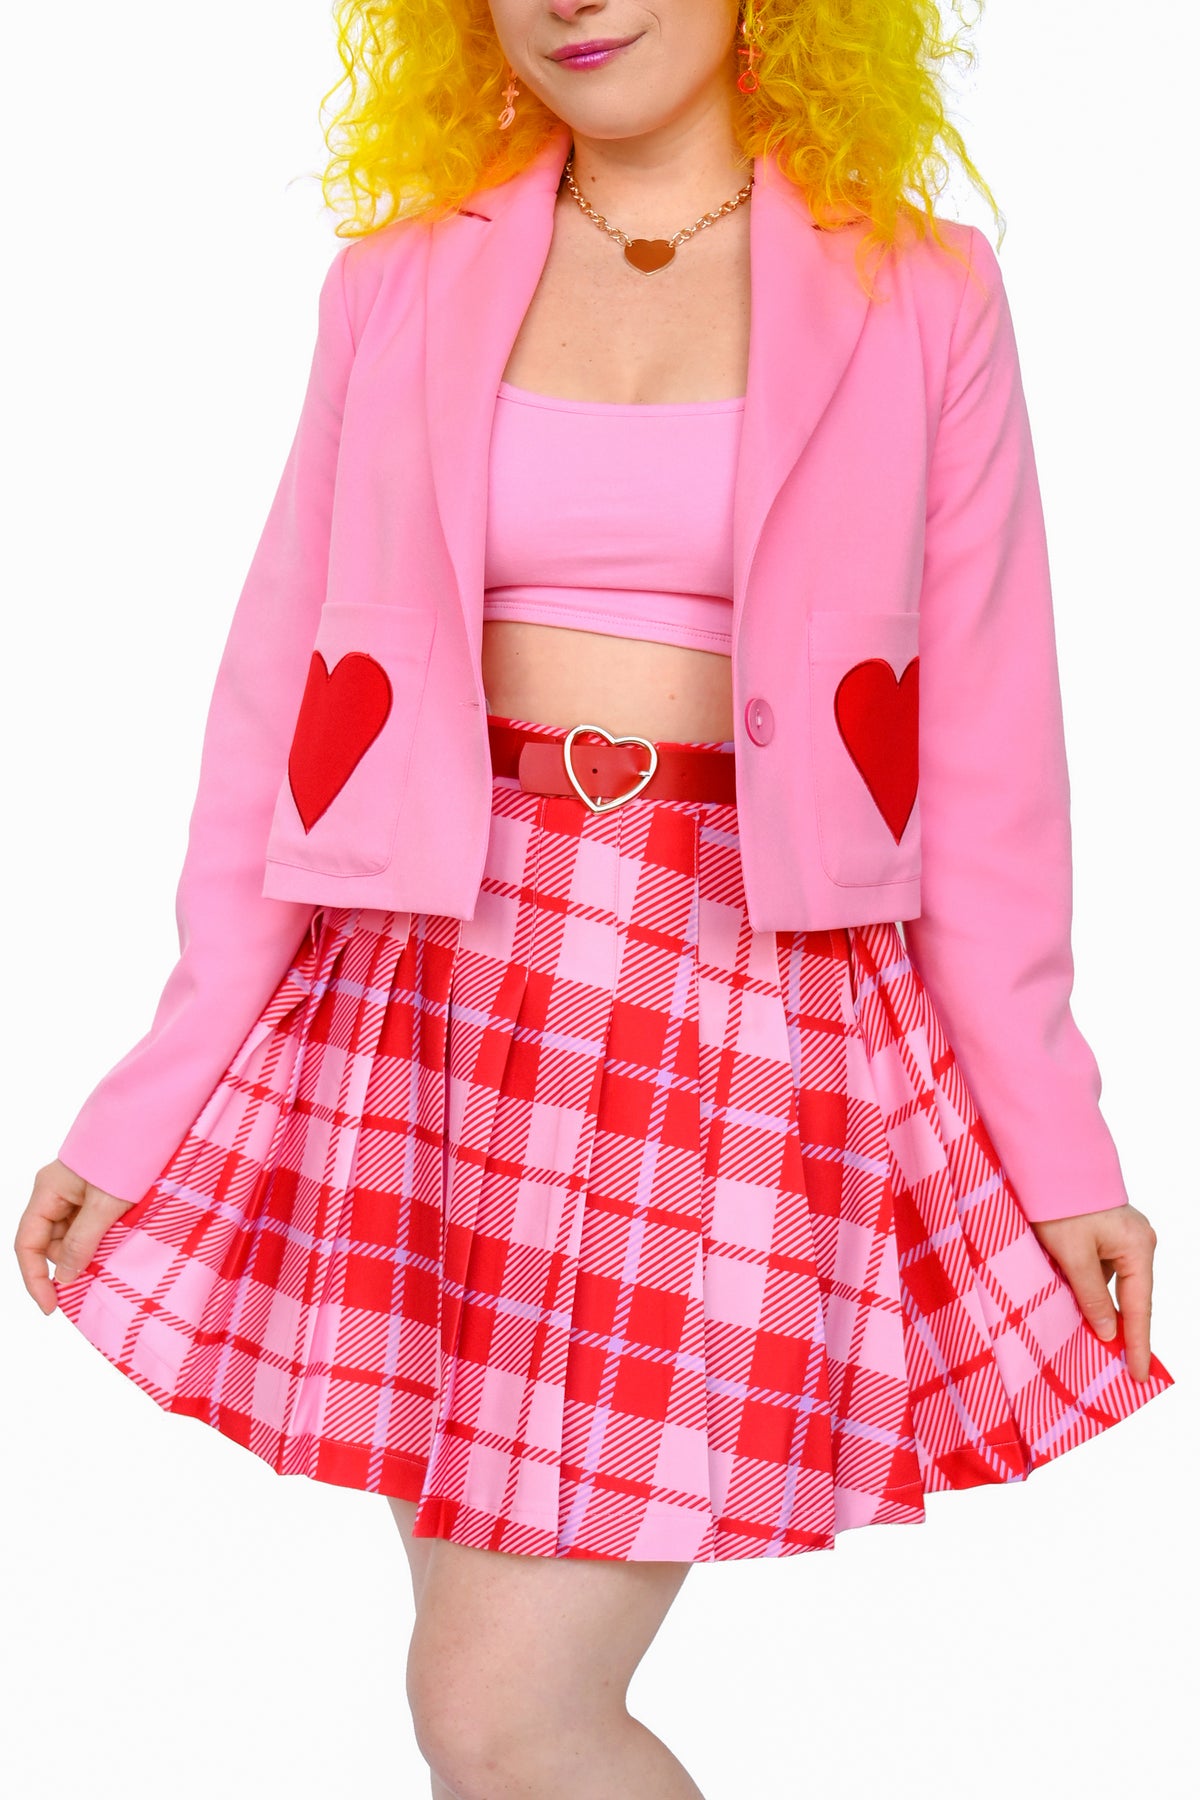 Valentine Claire Pleated Skirt - X-Small left!